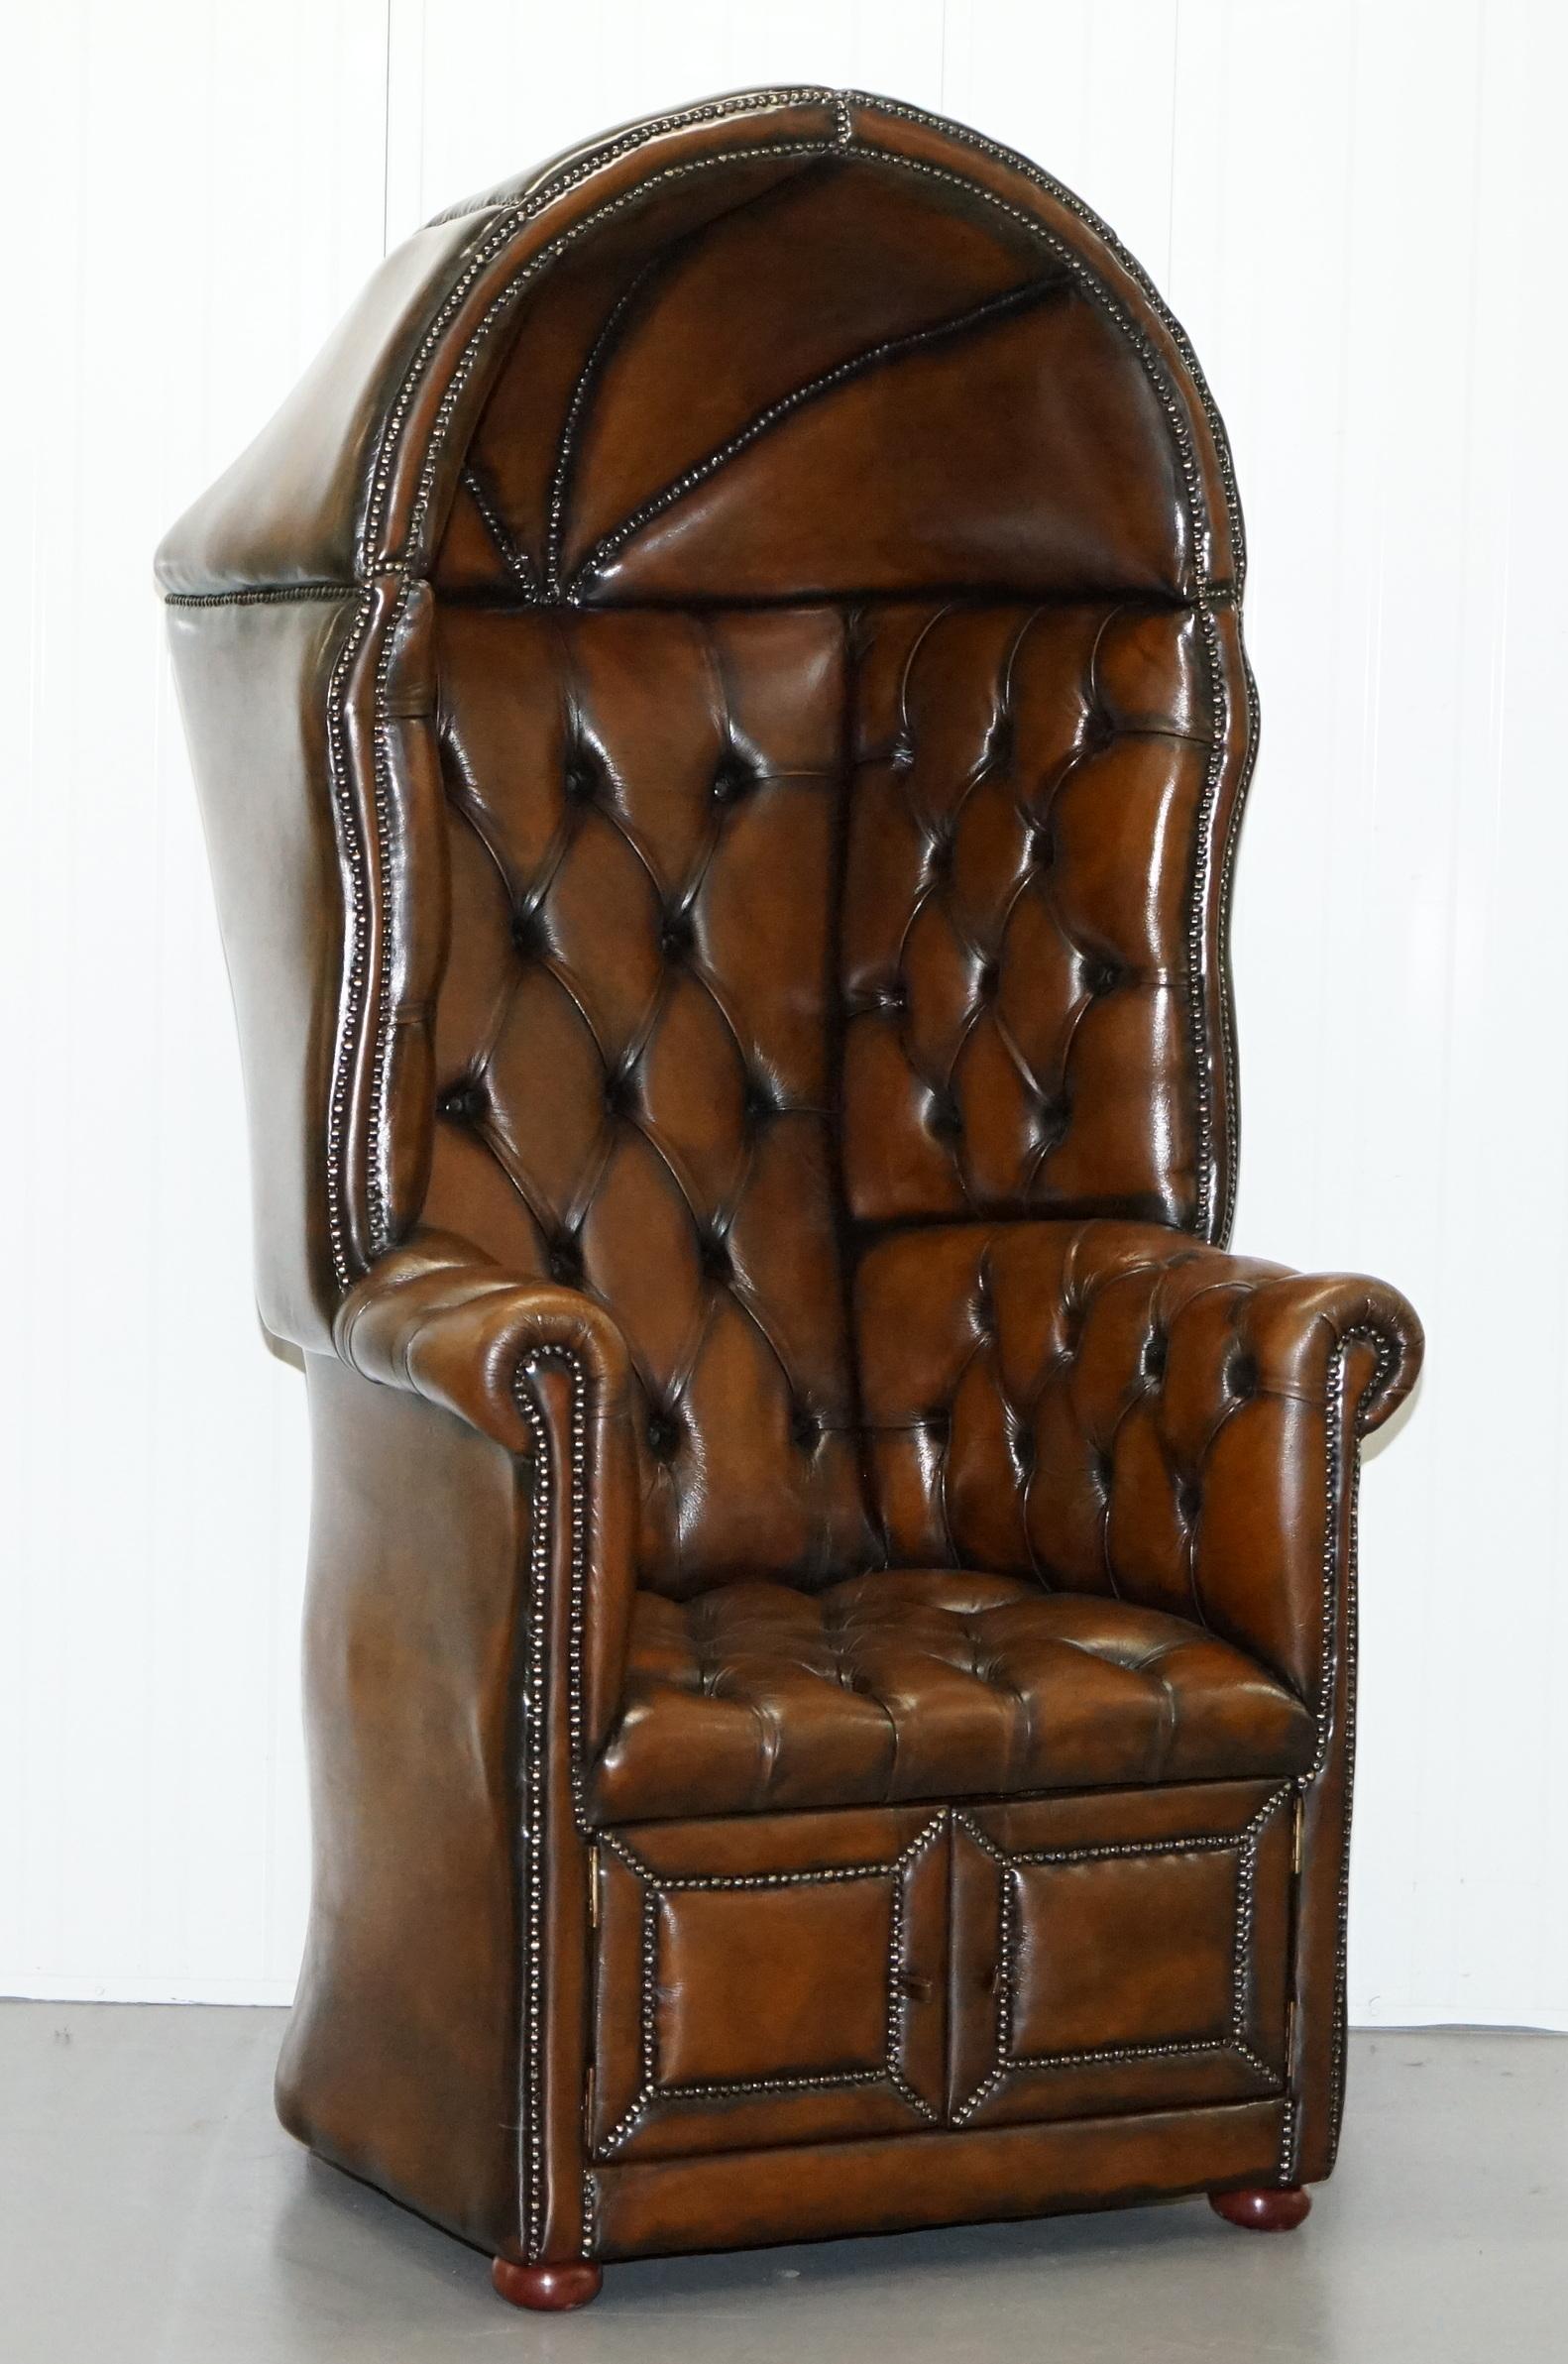 We are delighted to this stunning large fully restored hand dyed cigar brown leather Chesterfield Porters armchair

A good looking well-made and decorative armchair, the base section has a handy cupboard for storage. These chairs were originally